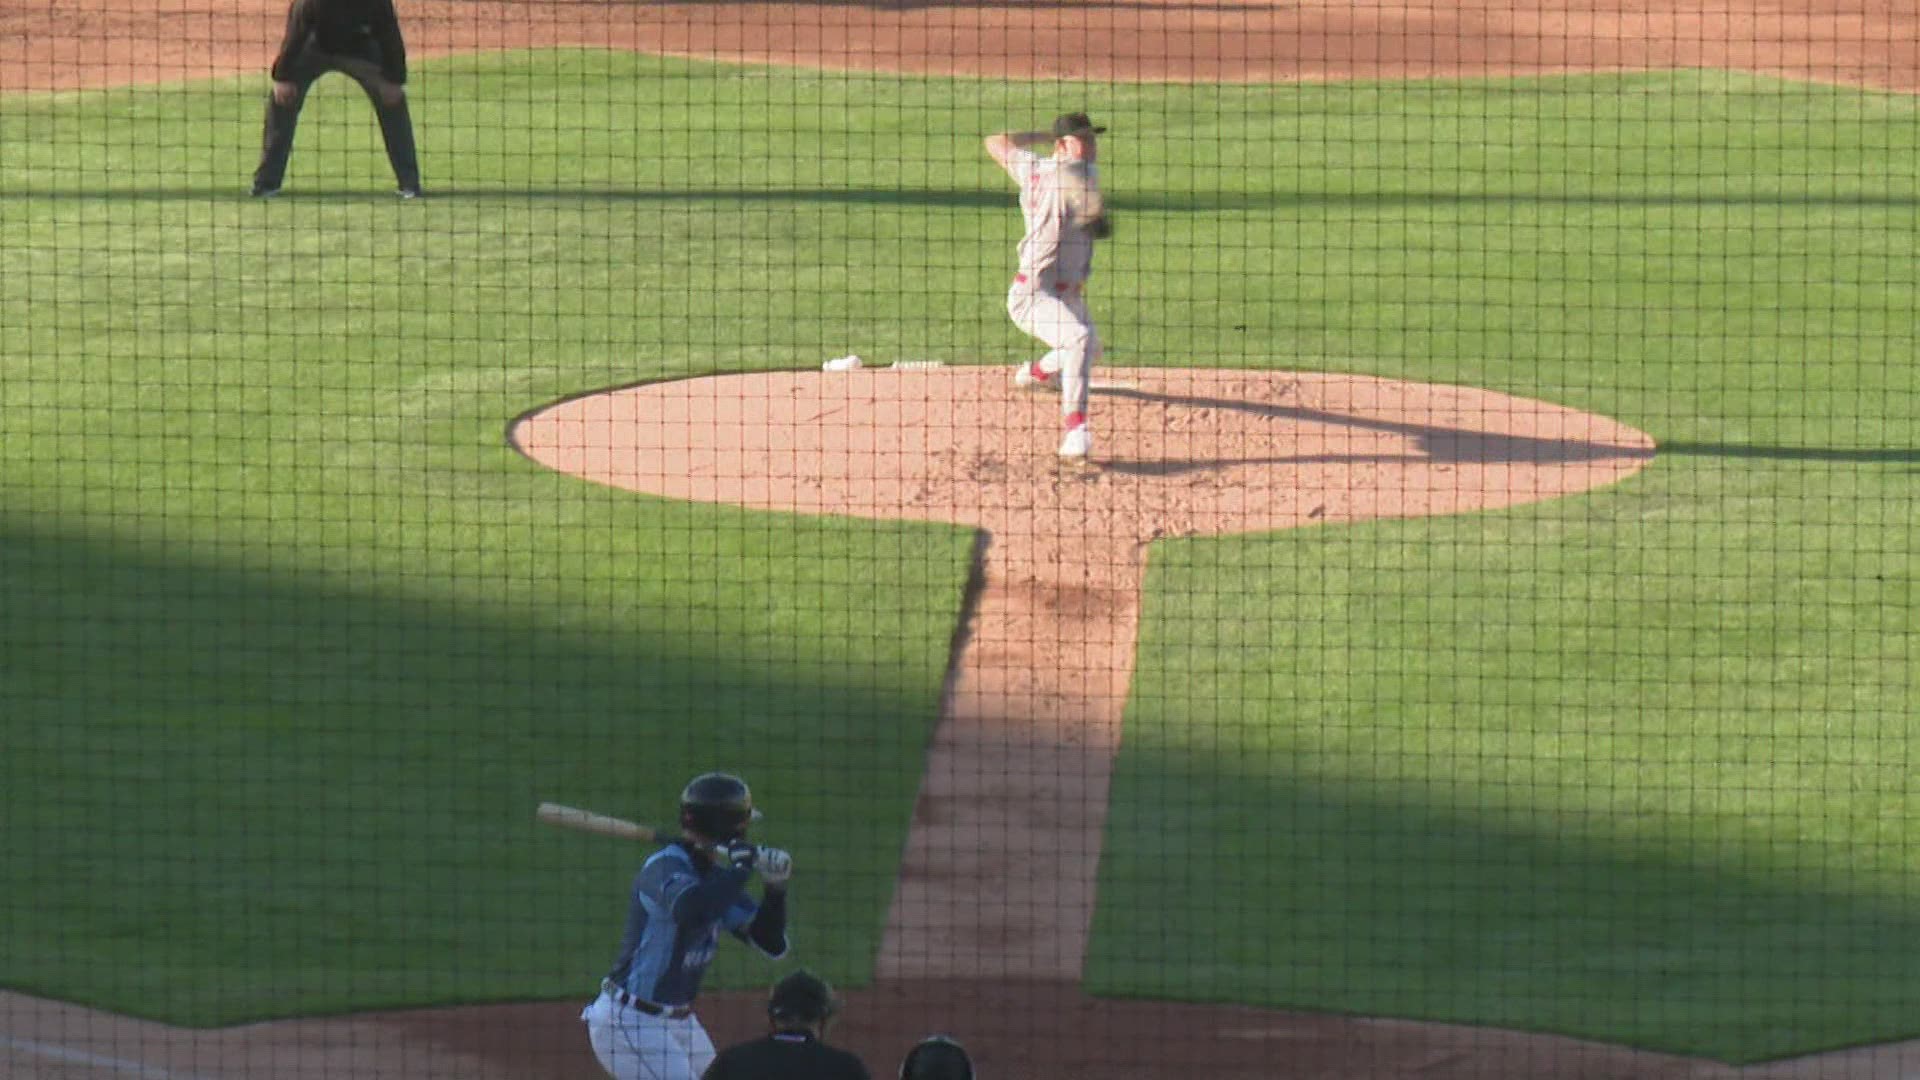 The Whitecaps took home their first home win of the season against the Great Lakes Loons 8-9.